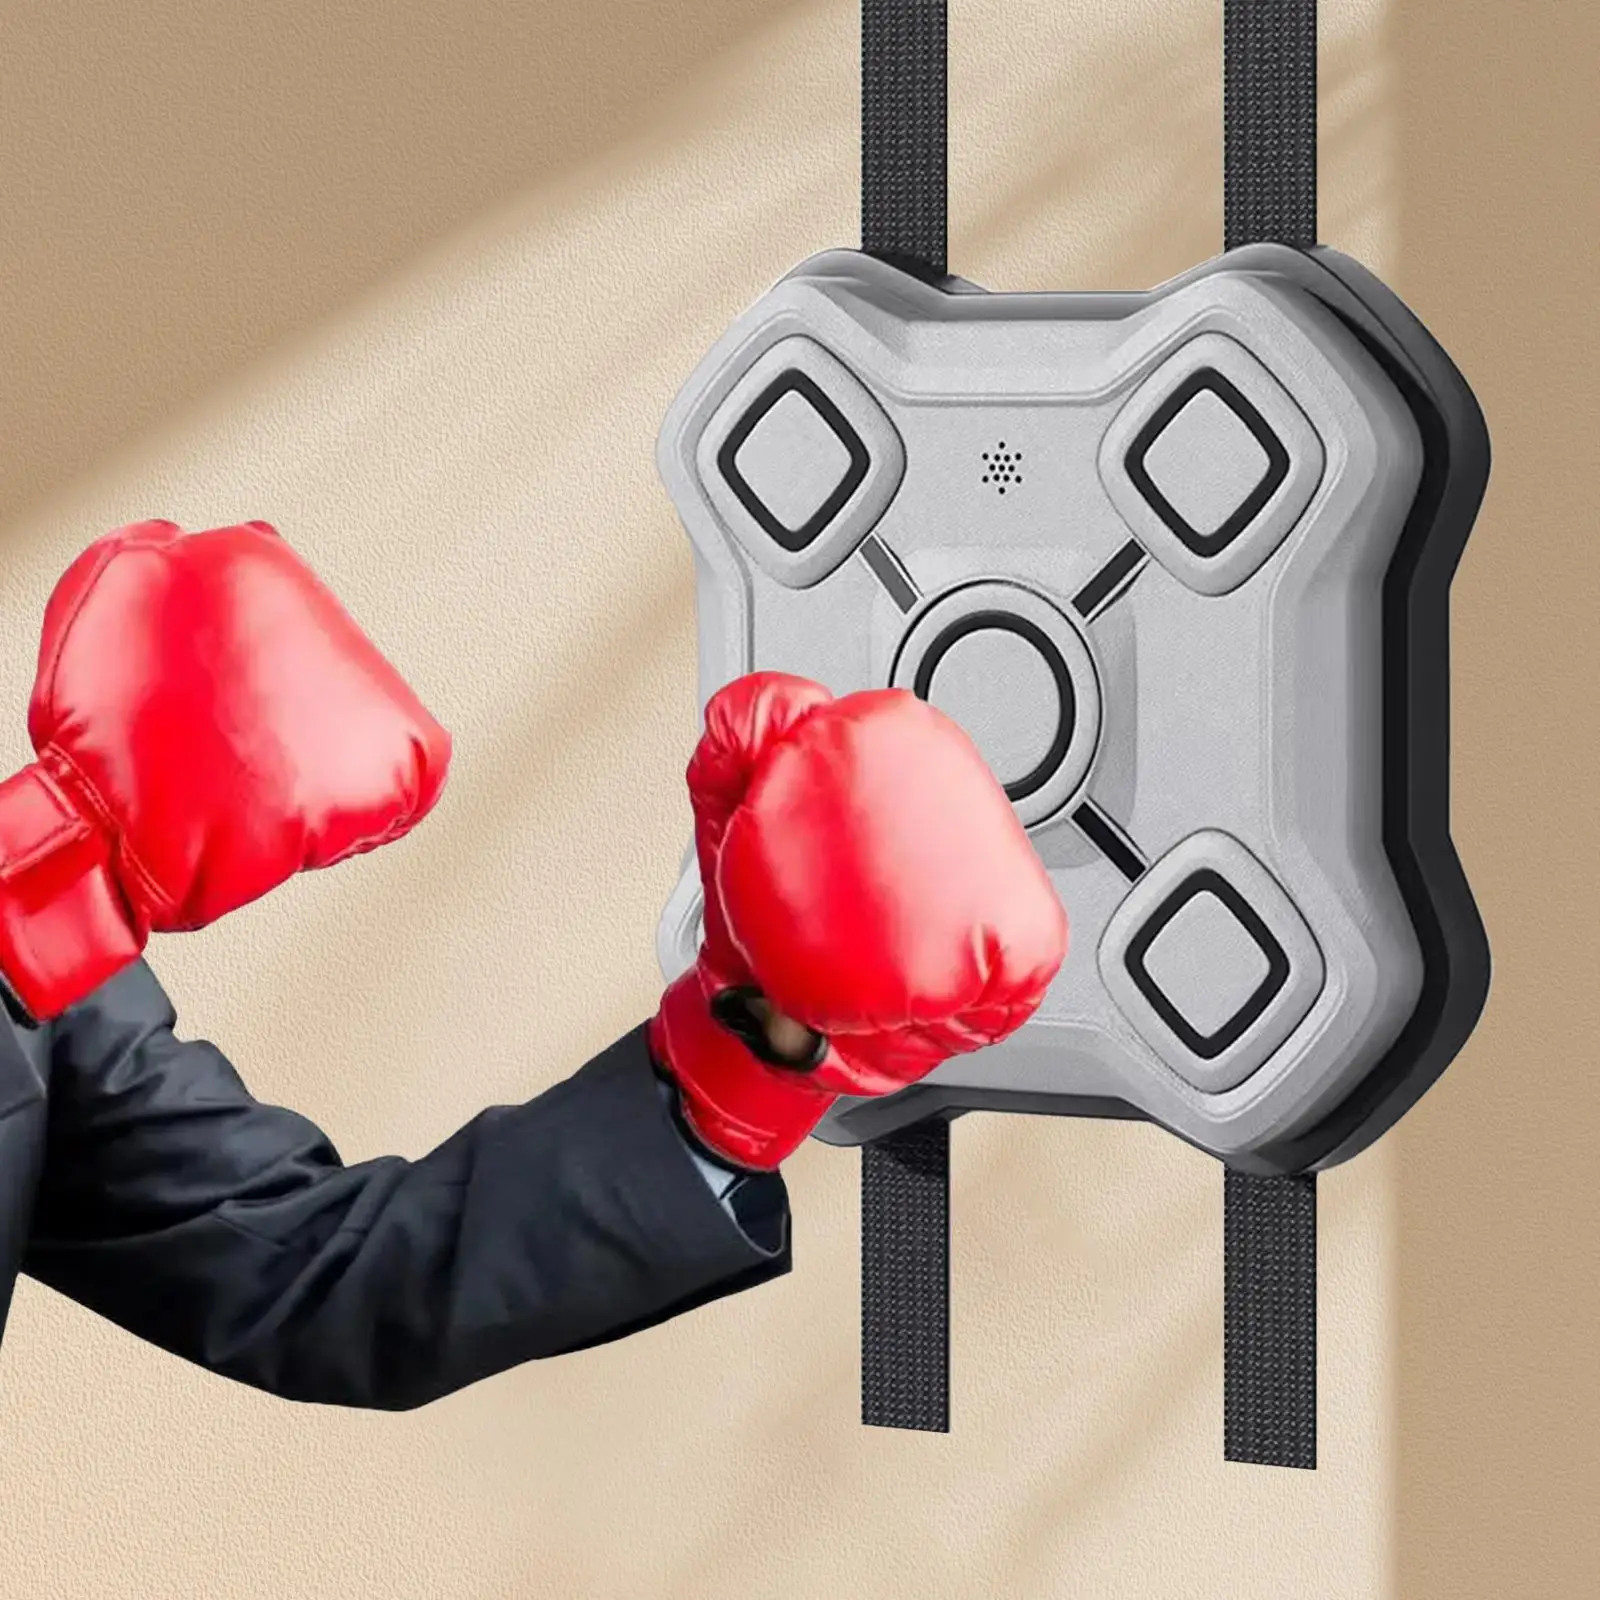 Music Boxing Machine Gyms Music Boxing Pads Wall Mounted USB Rechargeable Reaction Target Wall Target with LED Lights Electronic